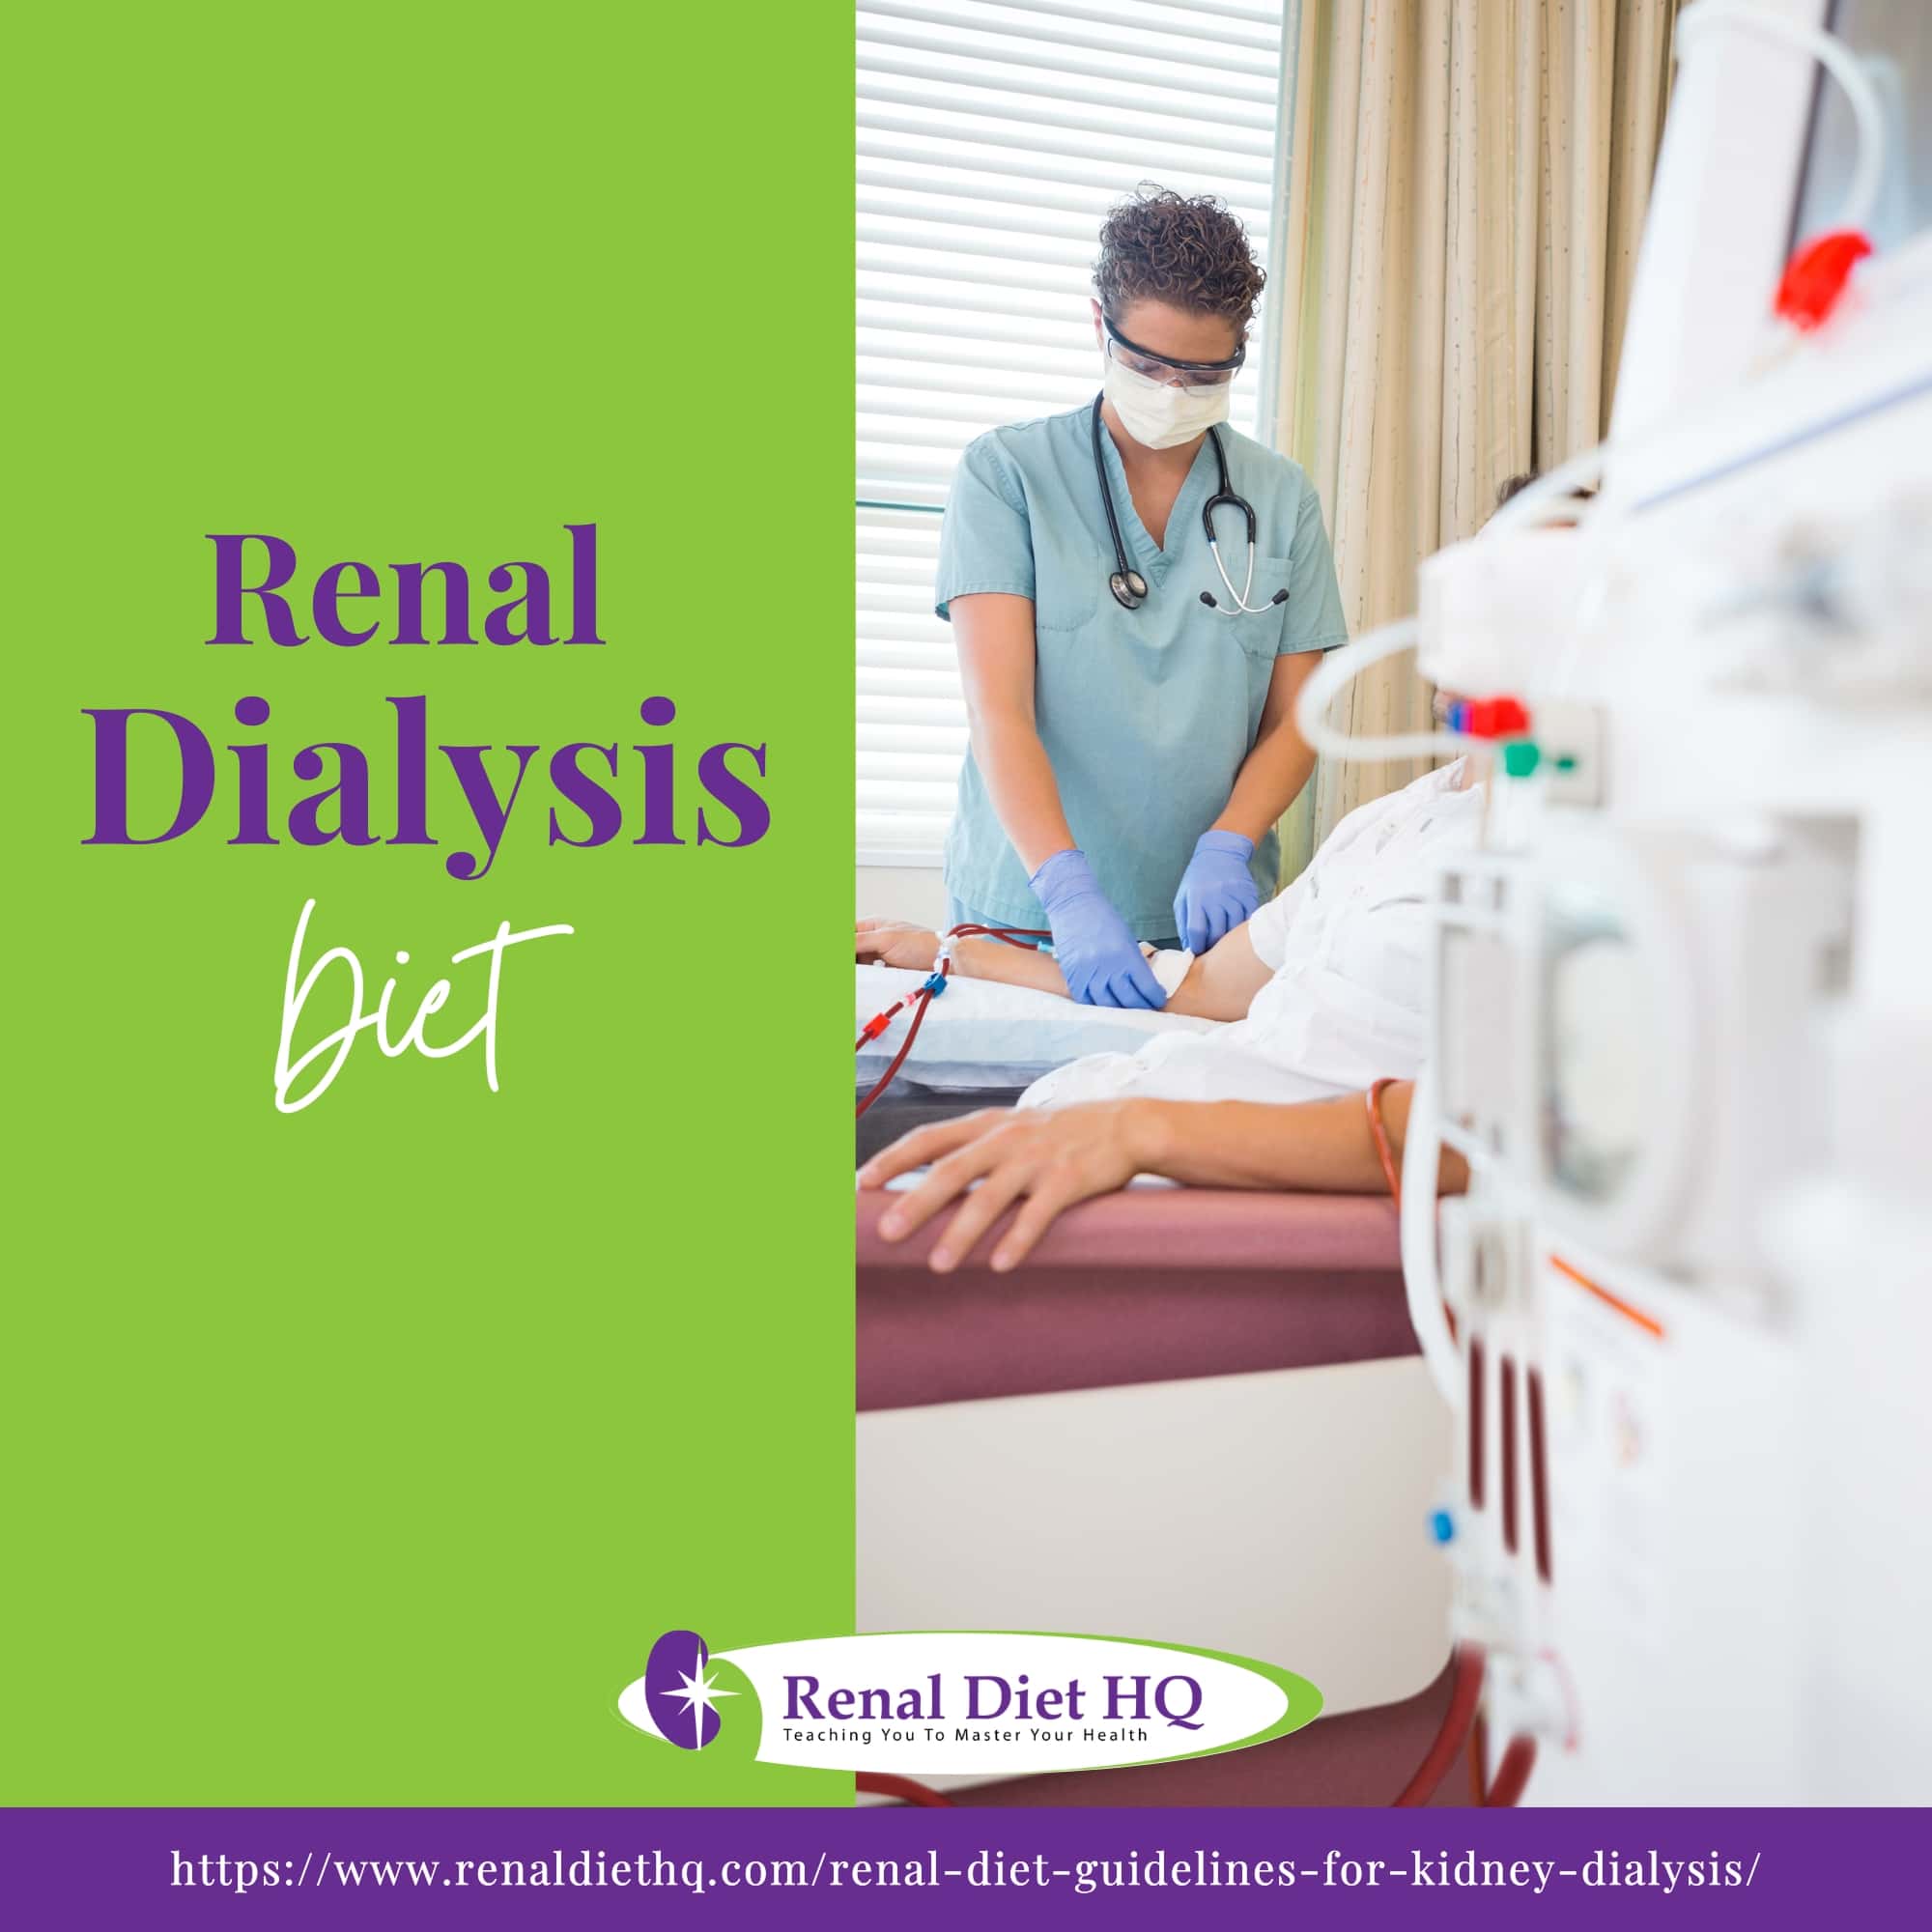 Nurse Giving Renal Dialysis Treatment to Patient